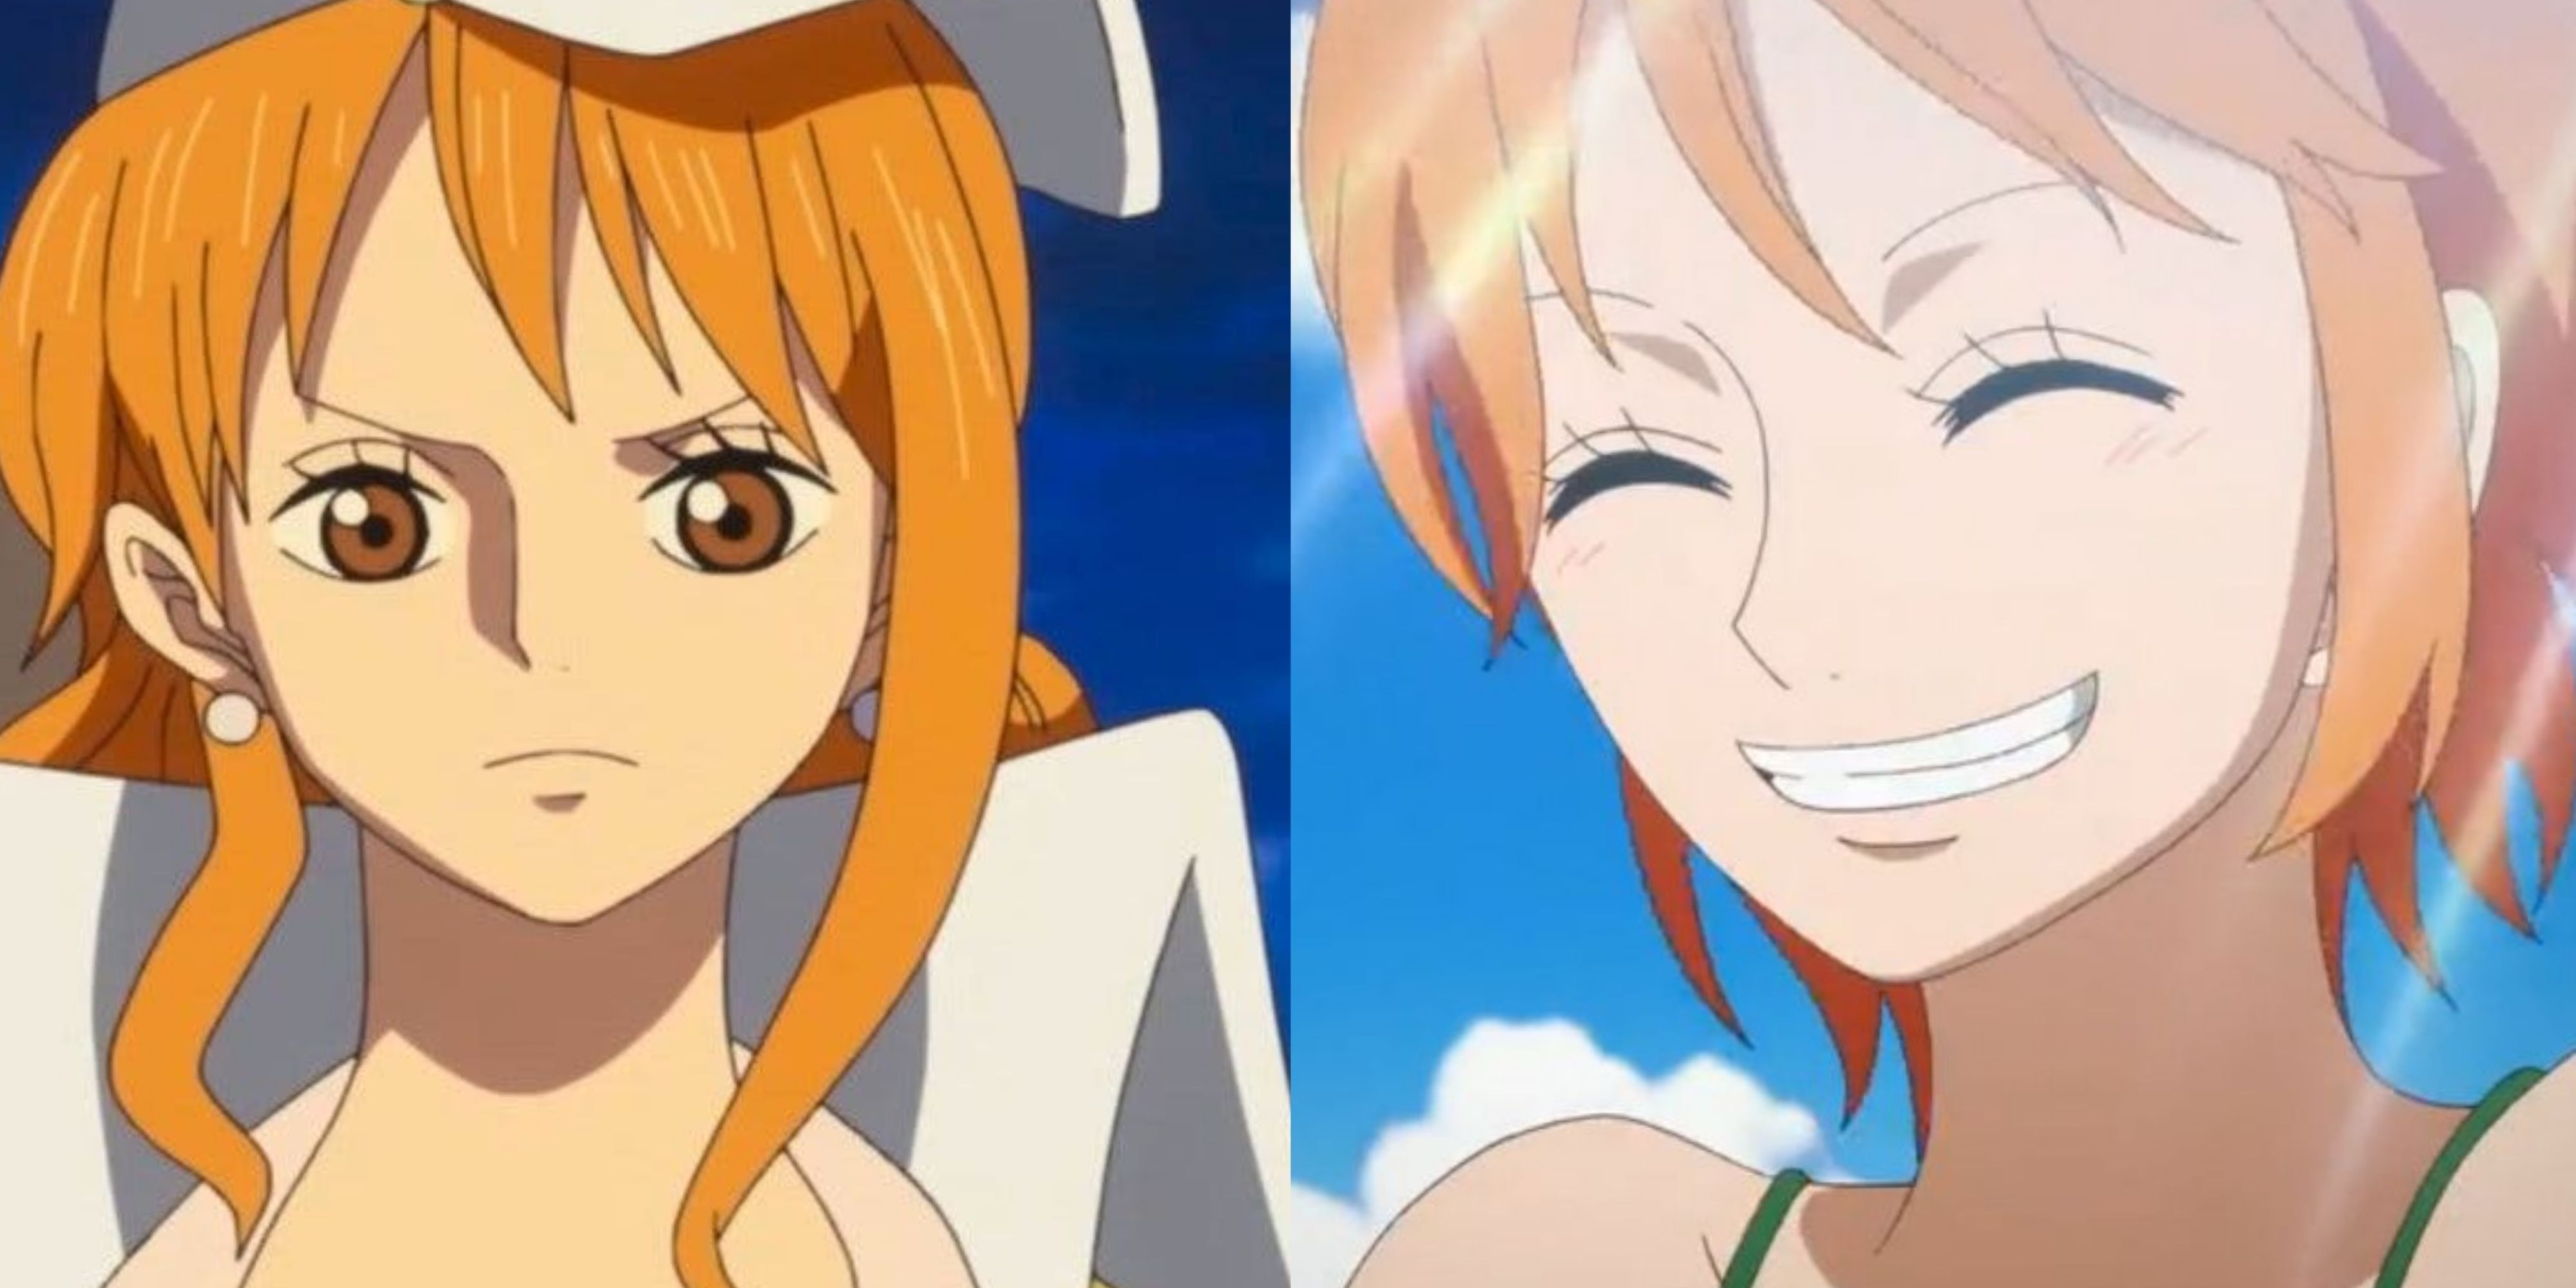 smiling nami — Nami's first appearance in the anime.